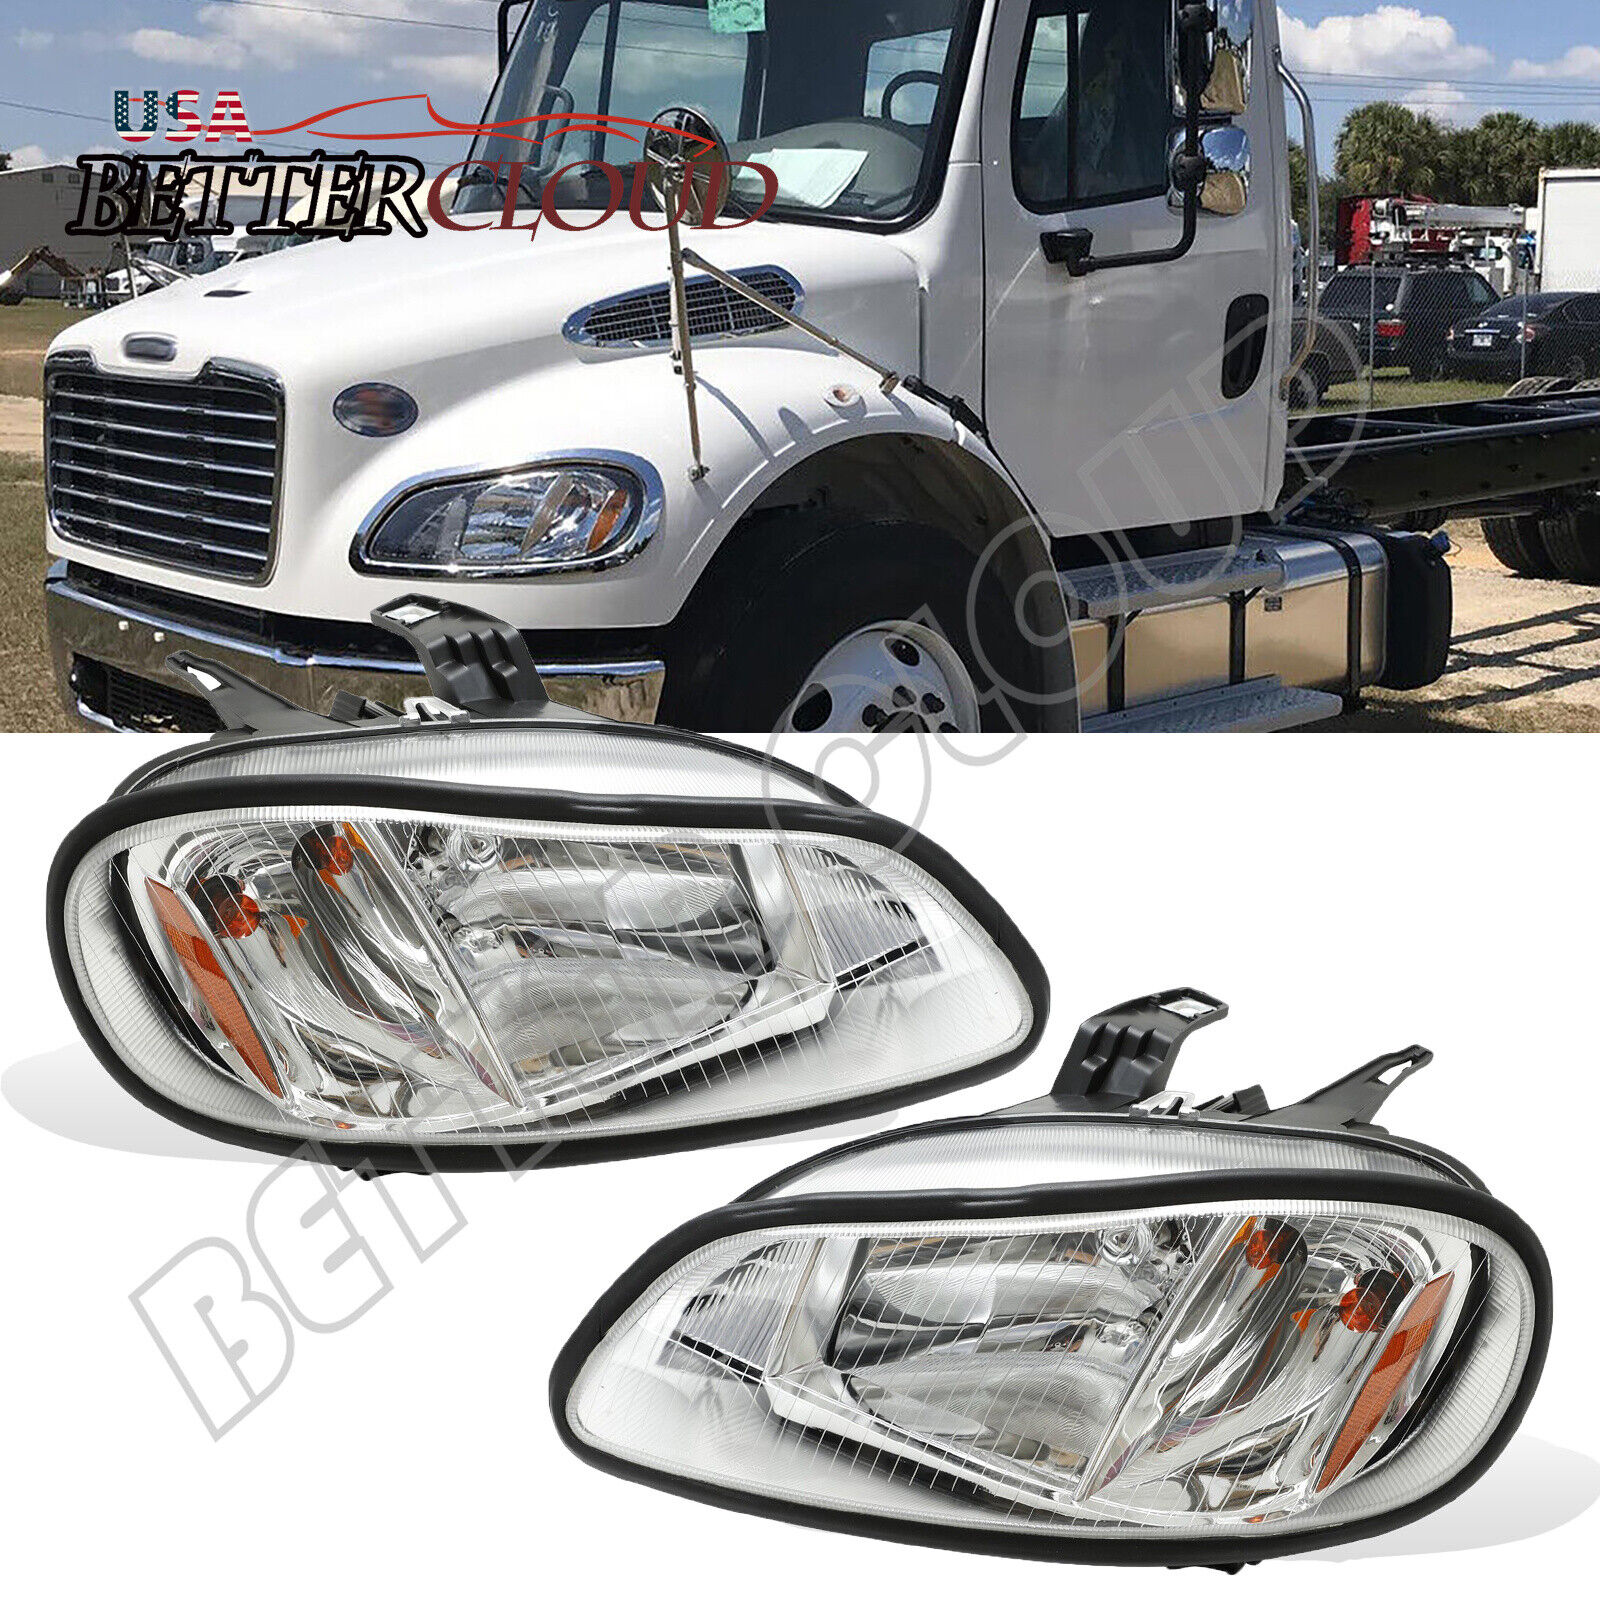 Headlights Headlamps Left & Right Pair Set For 02-18 Freightliner M-2 M2